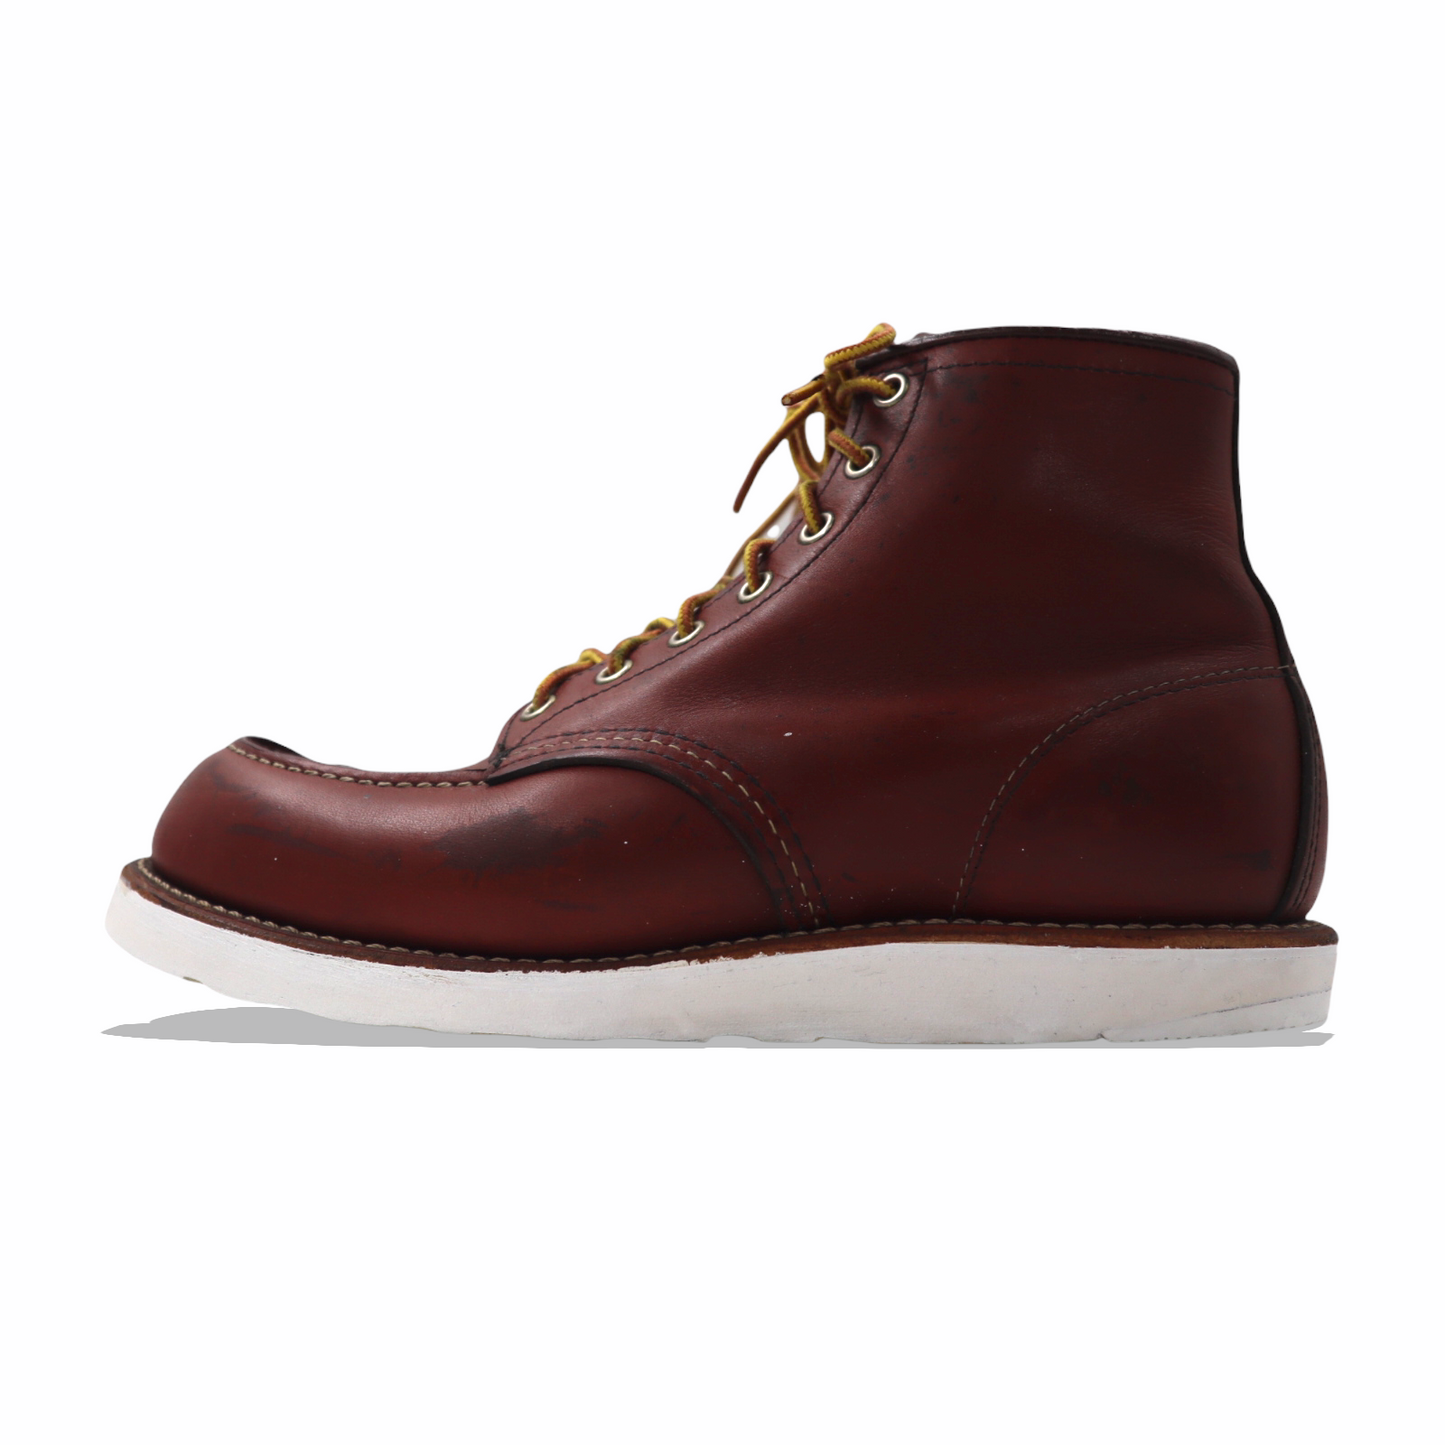 RED WING モックトゥブーツ 26.5cm ブラウン 6INCH CLASSIC MOC TOE BOOT 9106-RED WING-古着